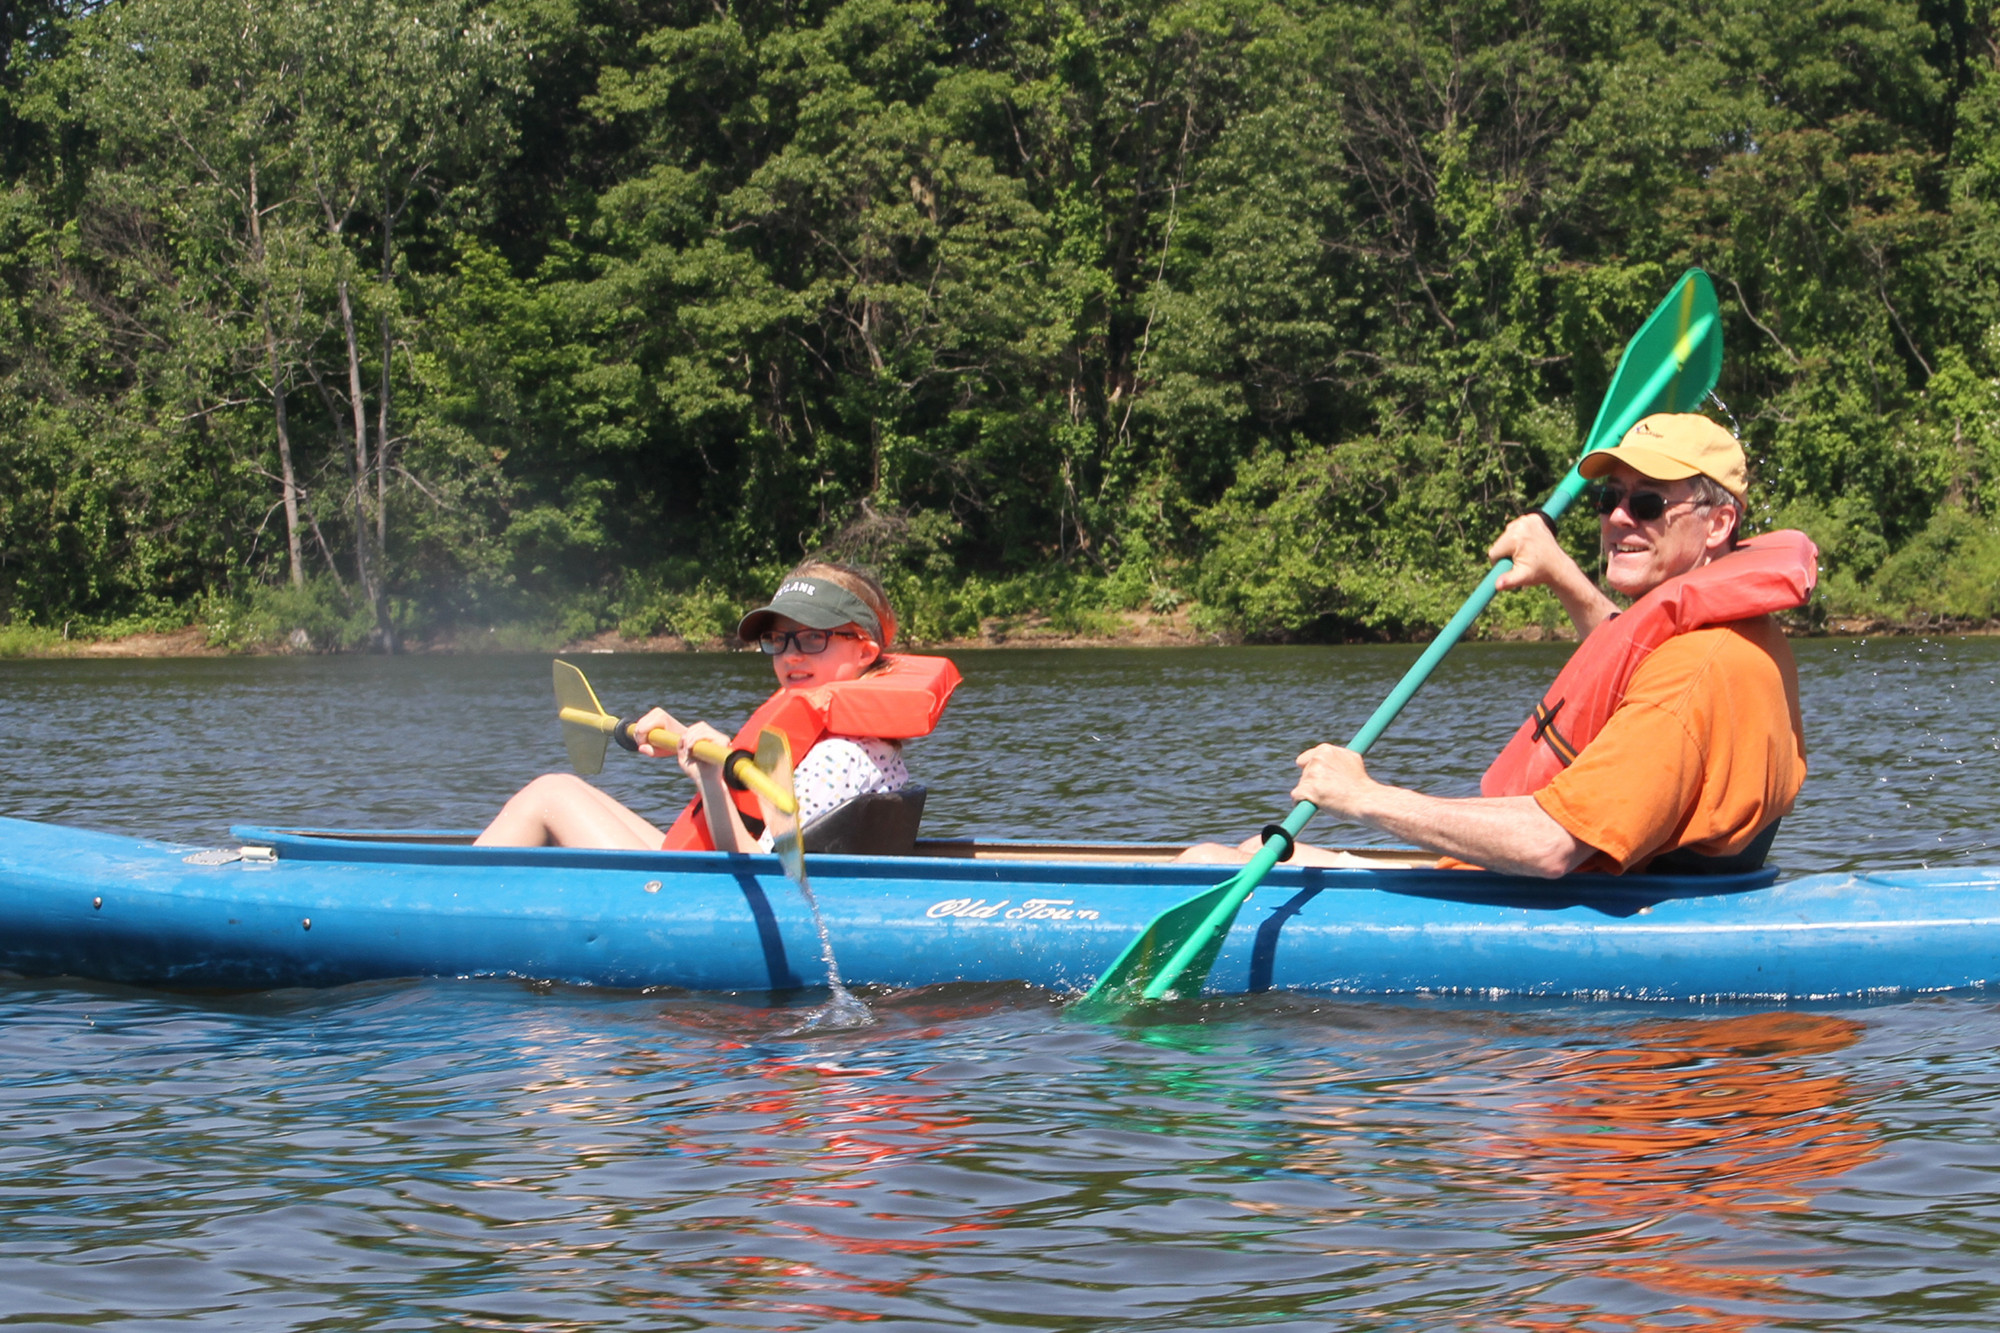 Annie and Charlie Crowley paddled around Hempstead Lake in a two-person kayak.